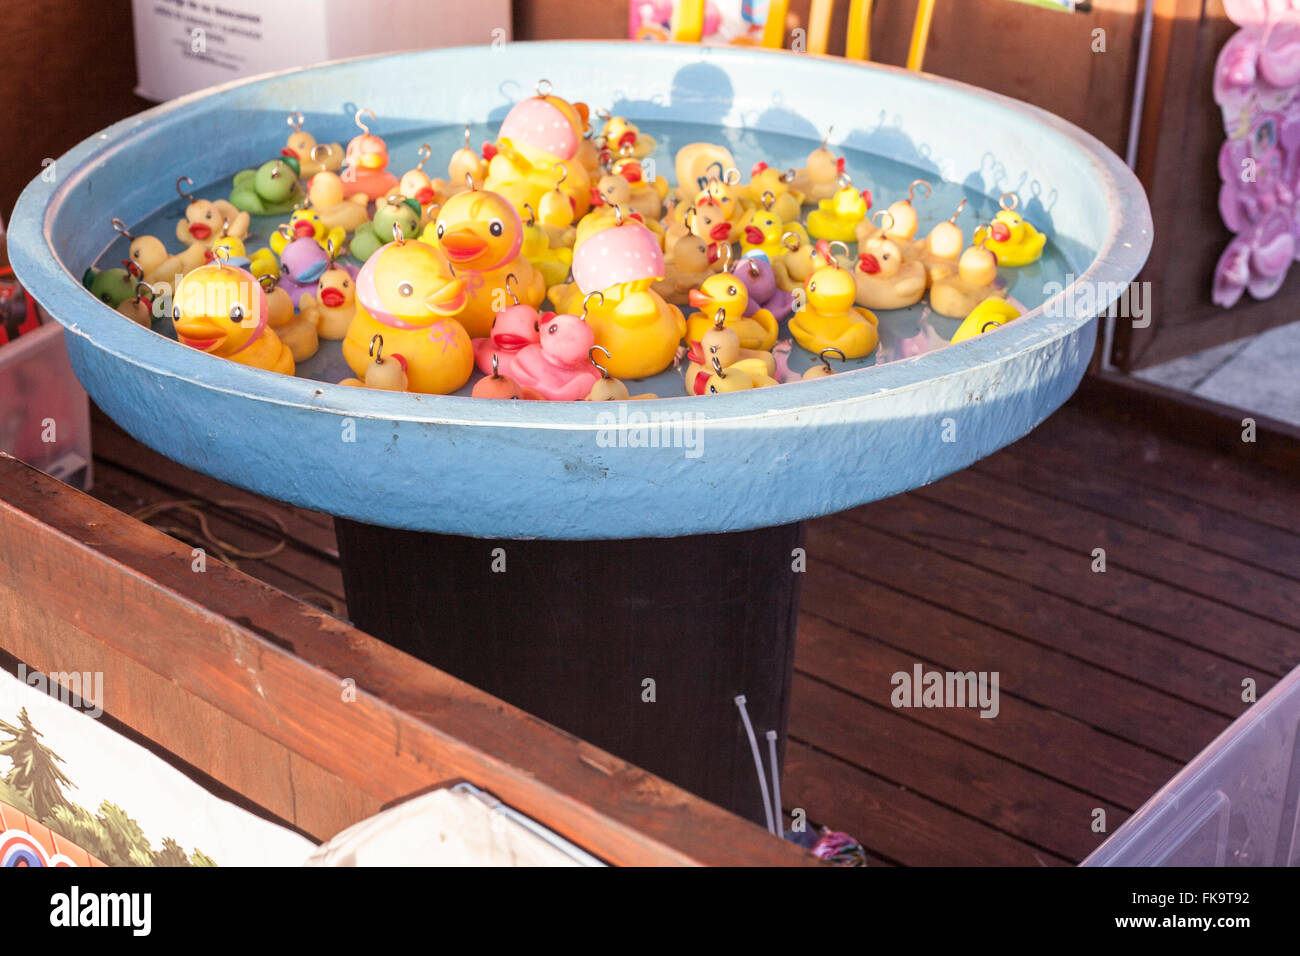 Lots of rubber ducks floating for play with on fair Stock Photo